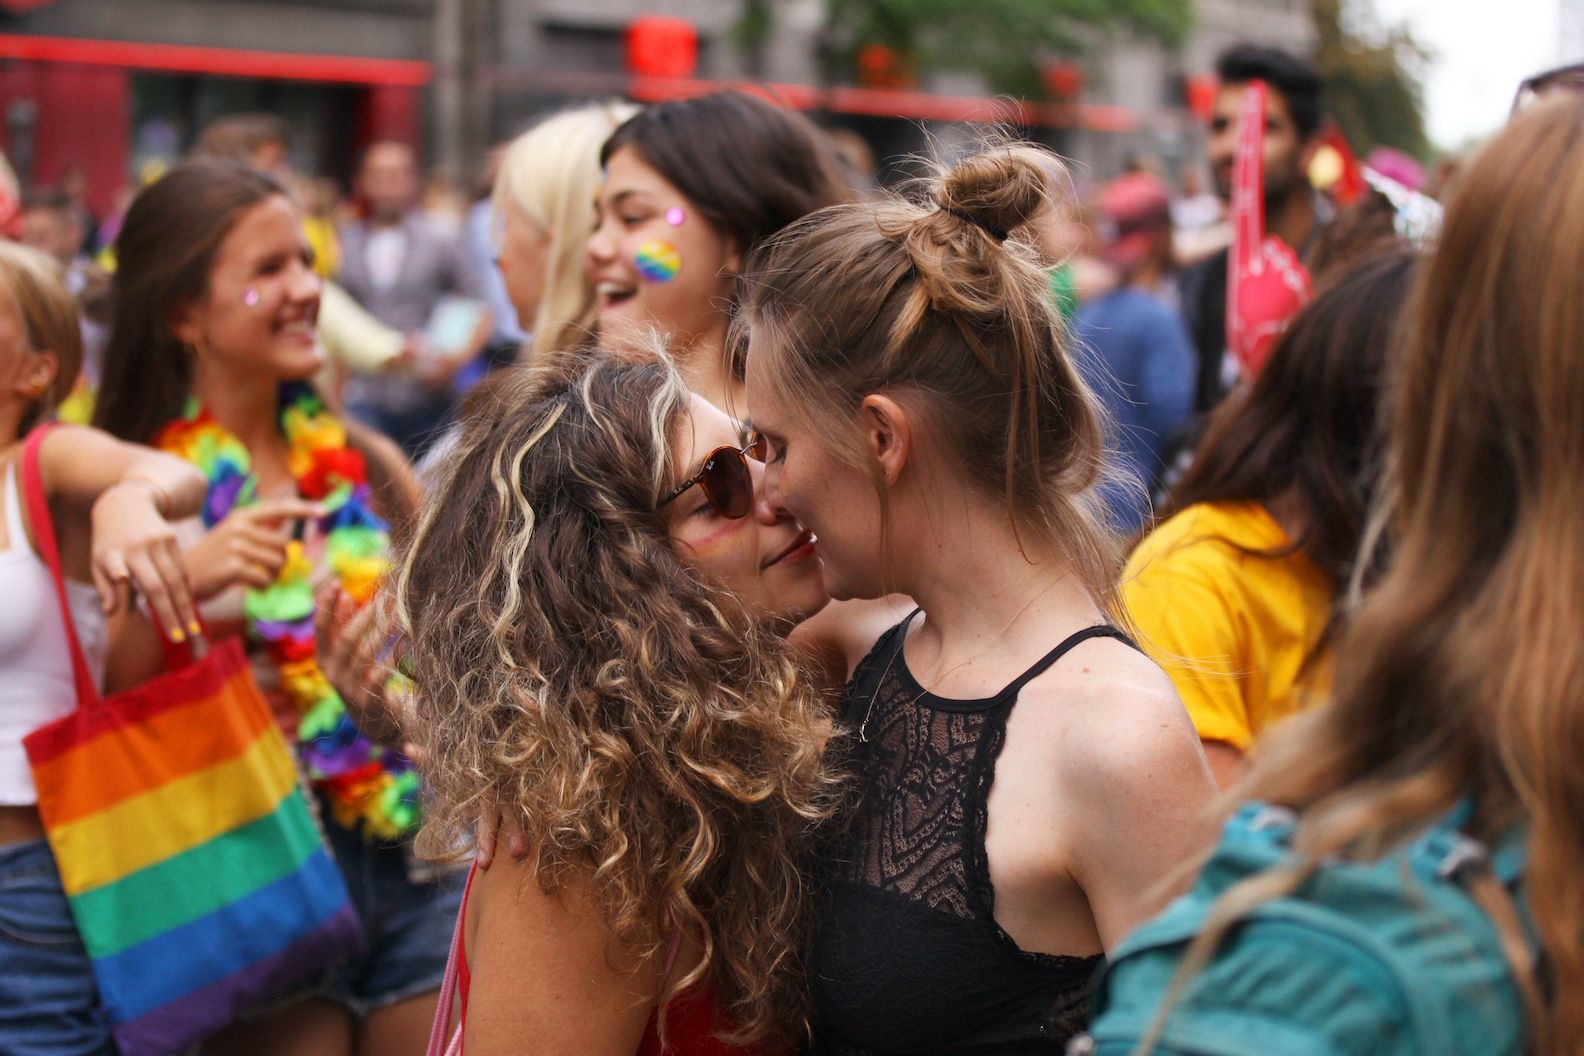 Copenhagen among the most LGBTQ+-friendly capitals in the world